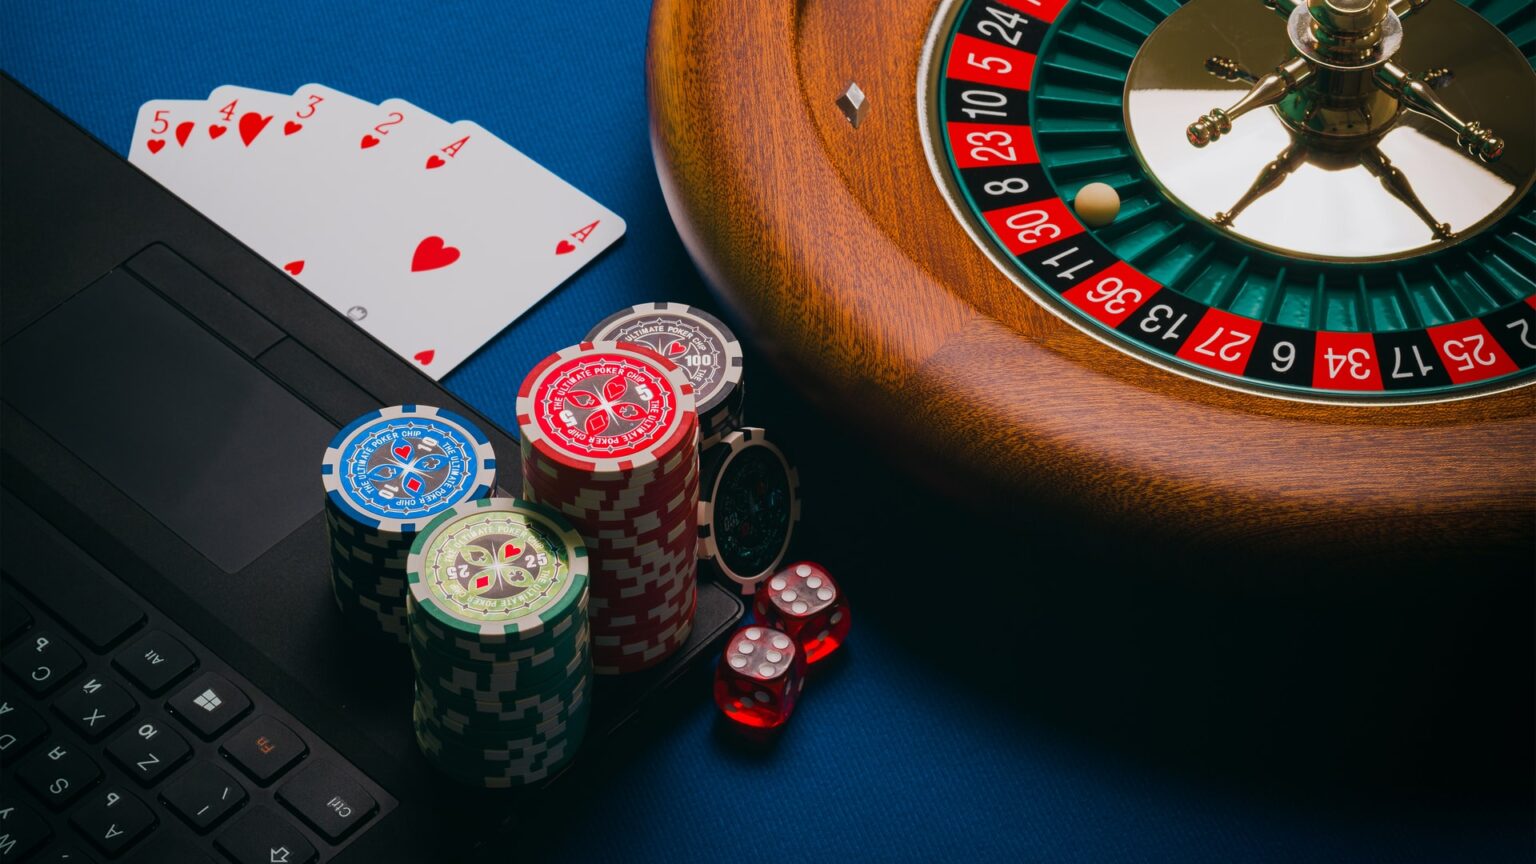 Modern technology is changing the way that people play and win at casinos. Stay on the cutting edge by seeing what tech developments are coming next.